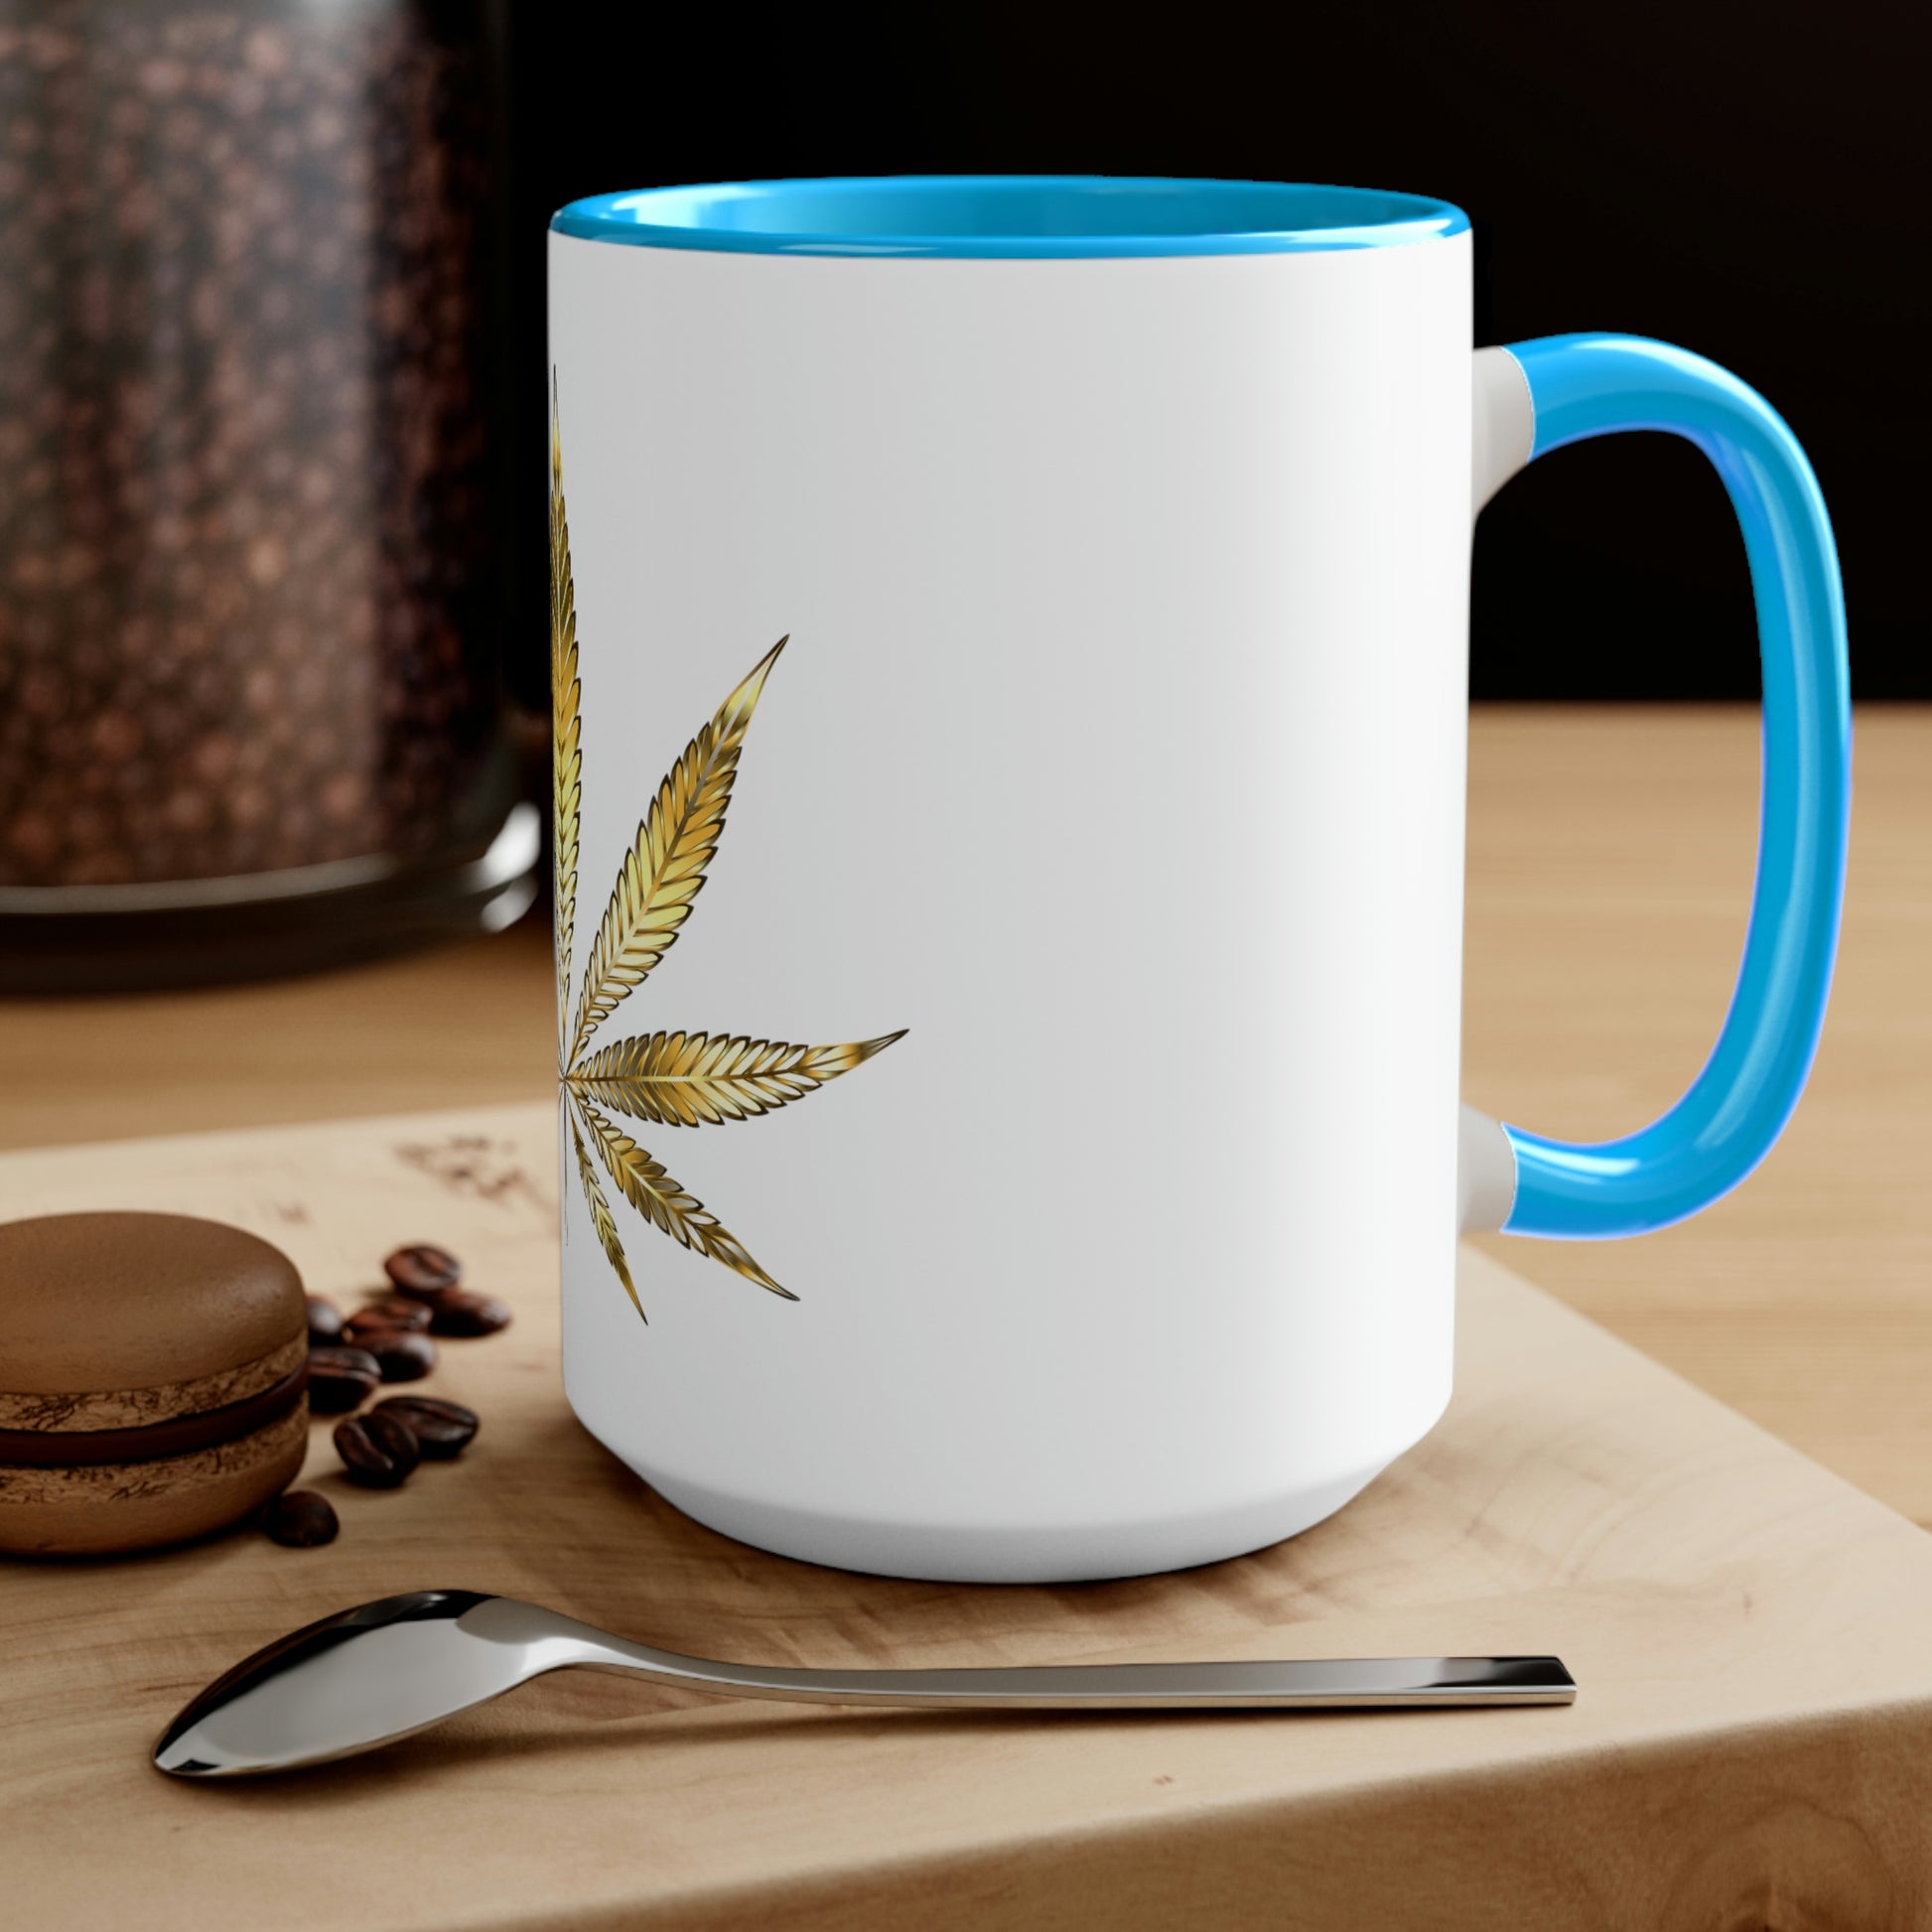 A white cannabis mug with a light blue interior featuring a bright gold weed leaf on the front center, sitting on a wood base.